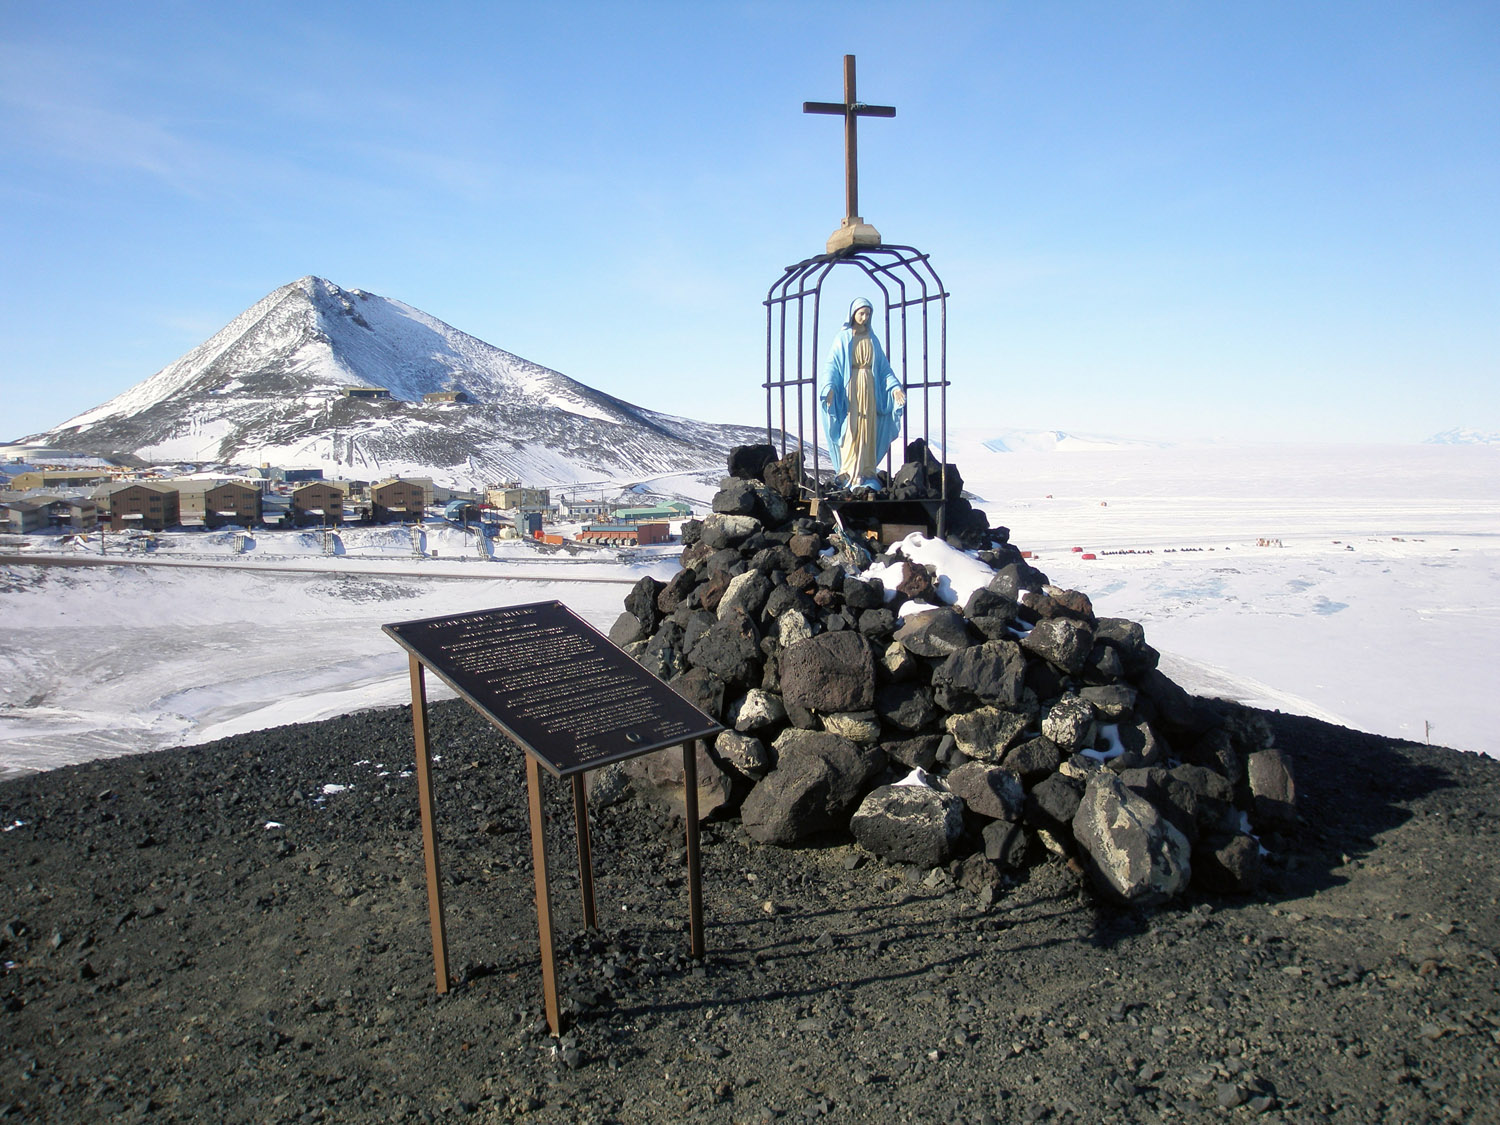 Roll Cage Mary - Our Lady of the Snows Shrine (Catholic)